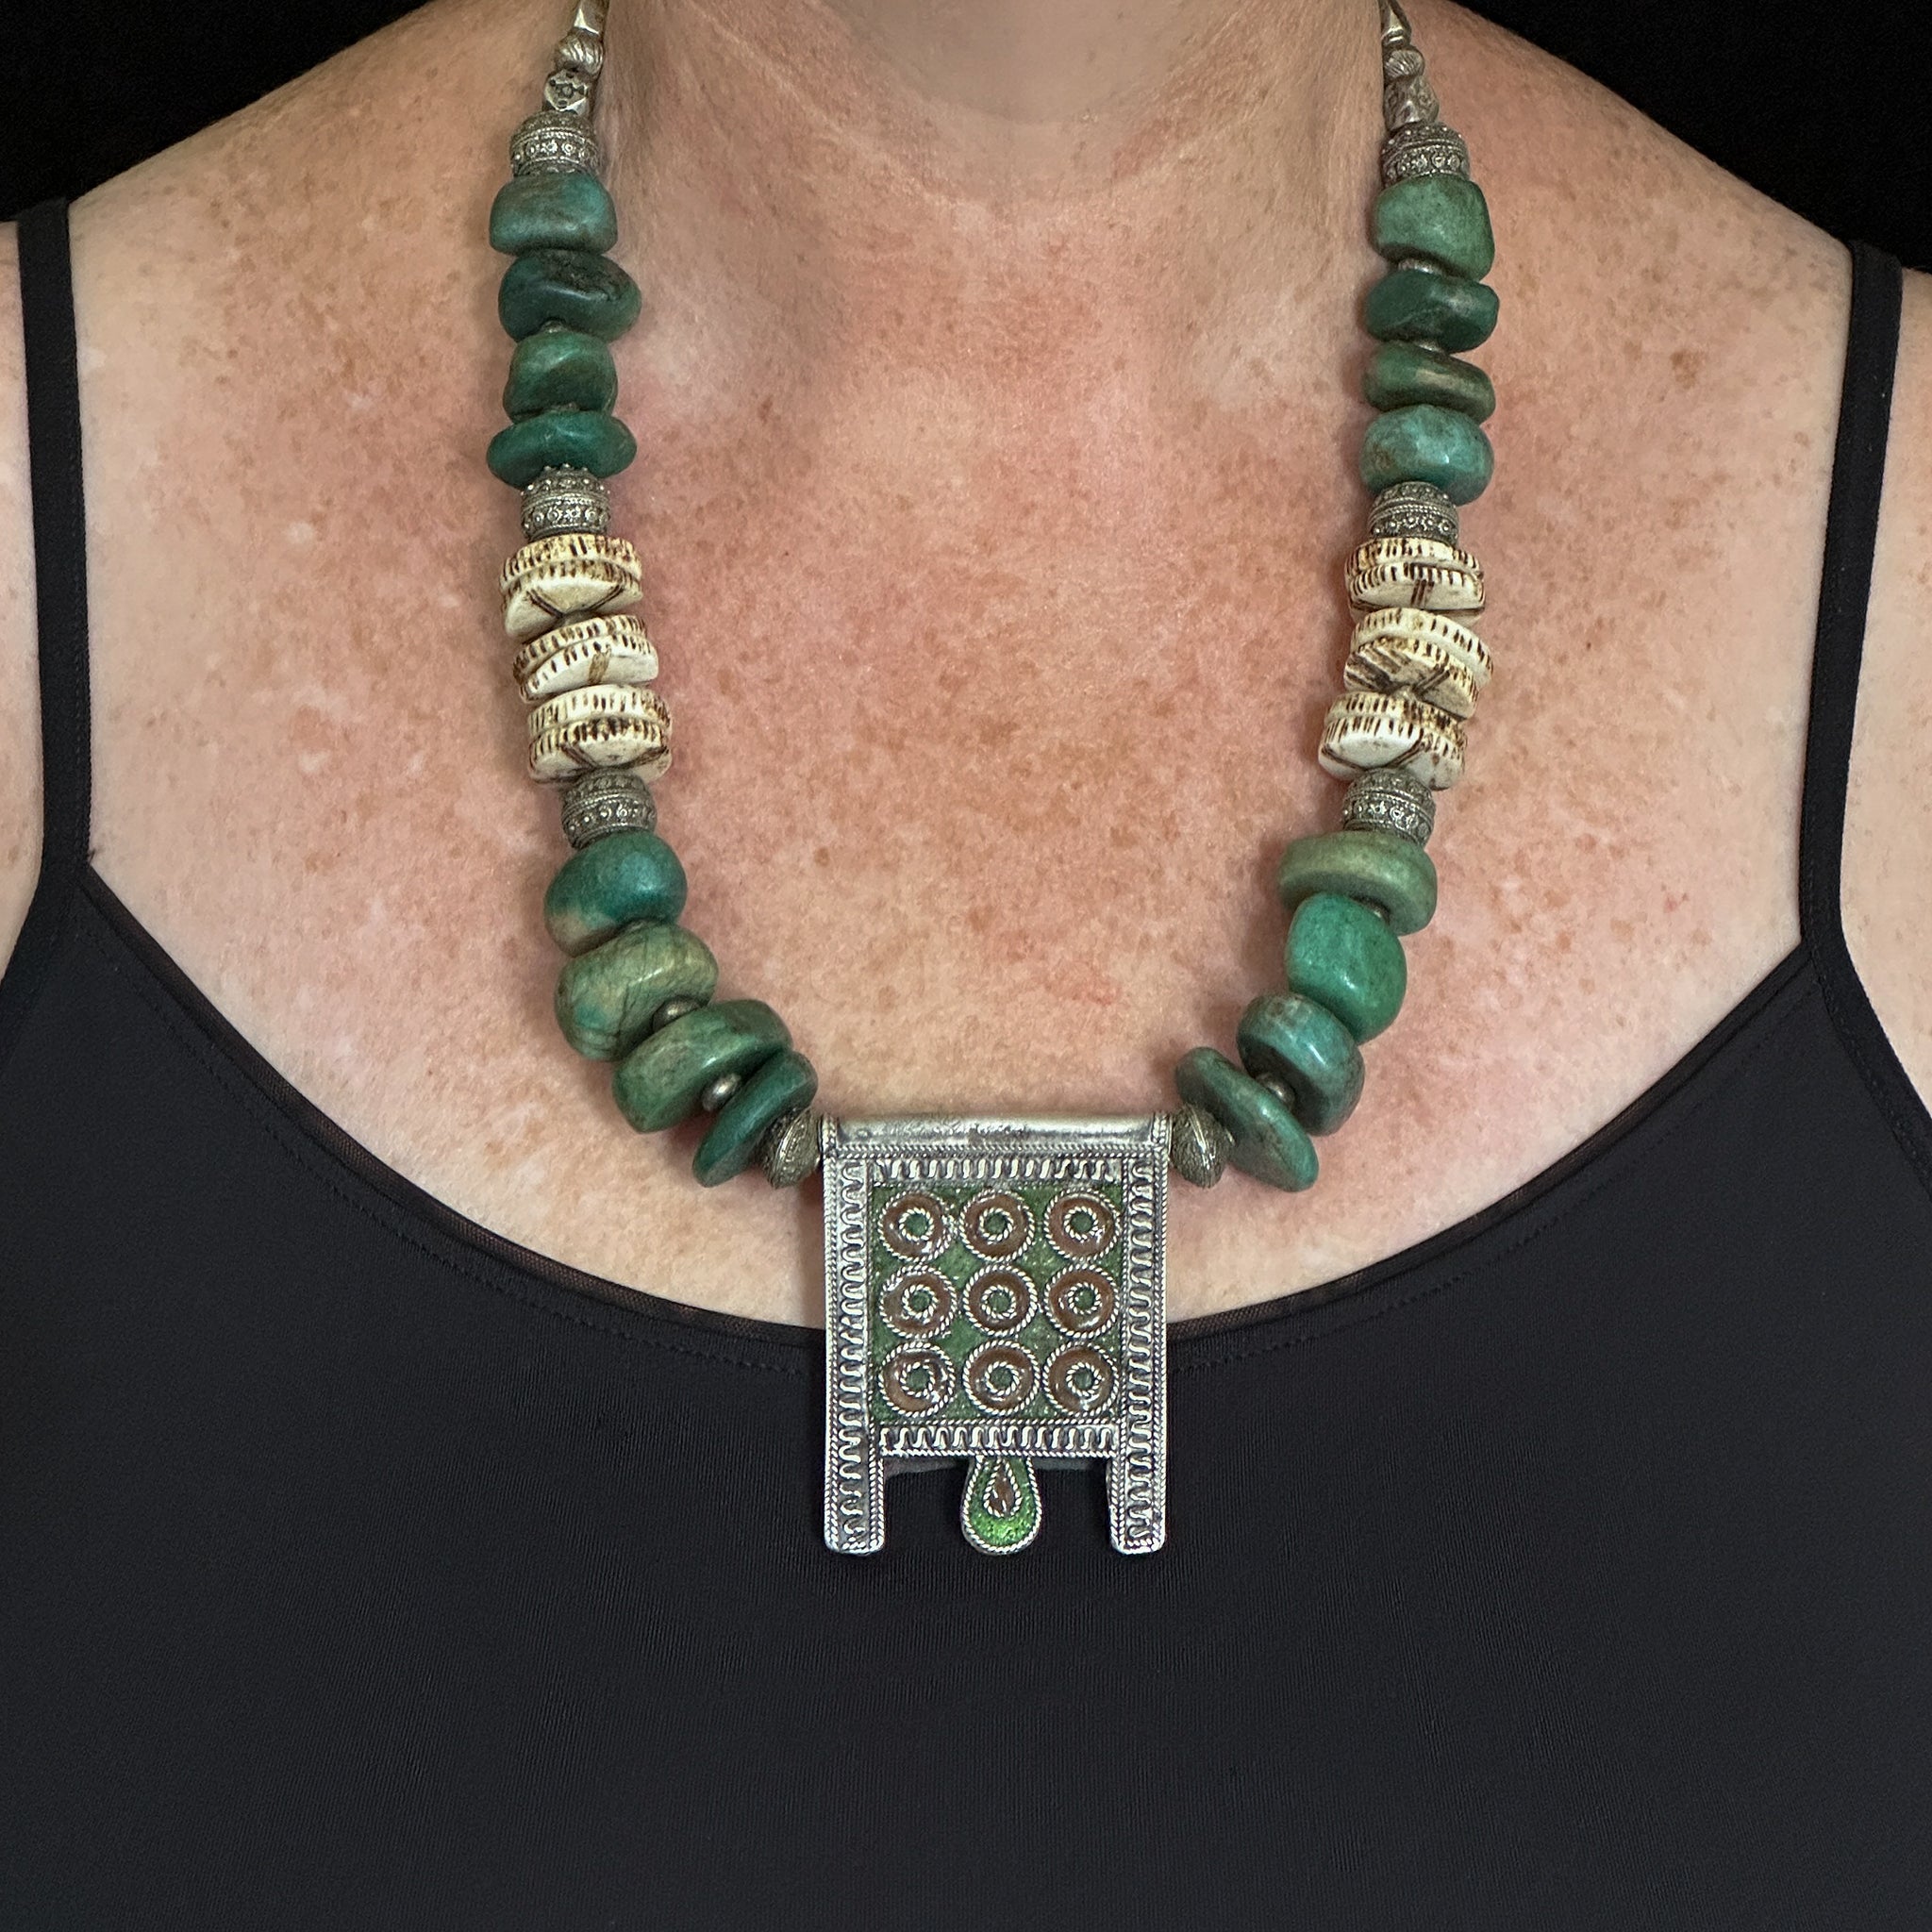 Vintage Moroccan Silver and Amazonite Necklace with Old Hirz Amulet Pendant